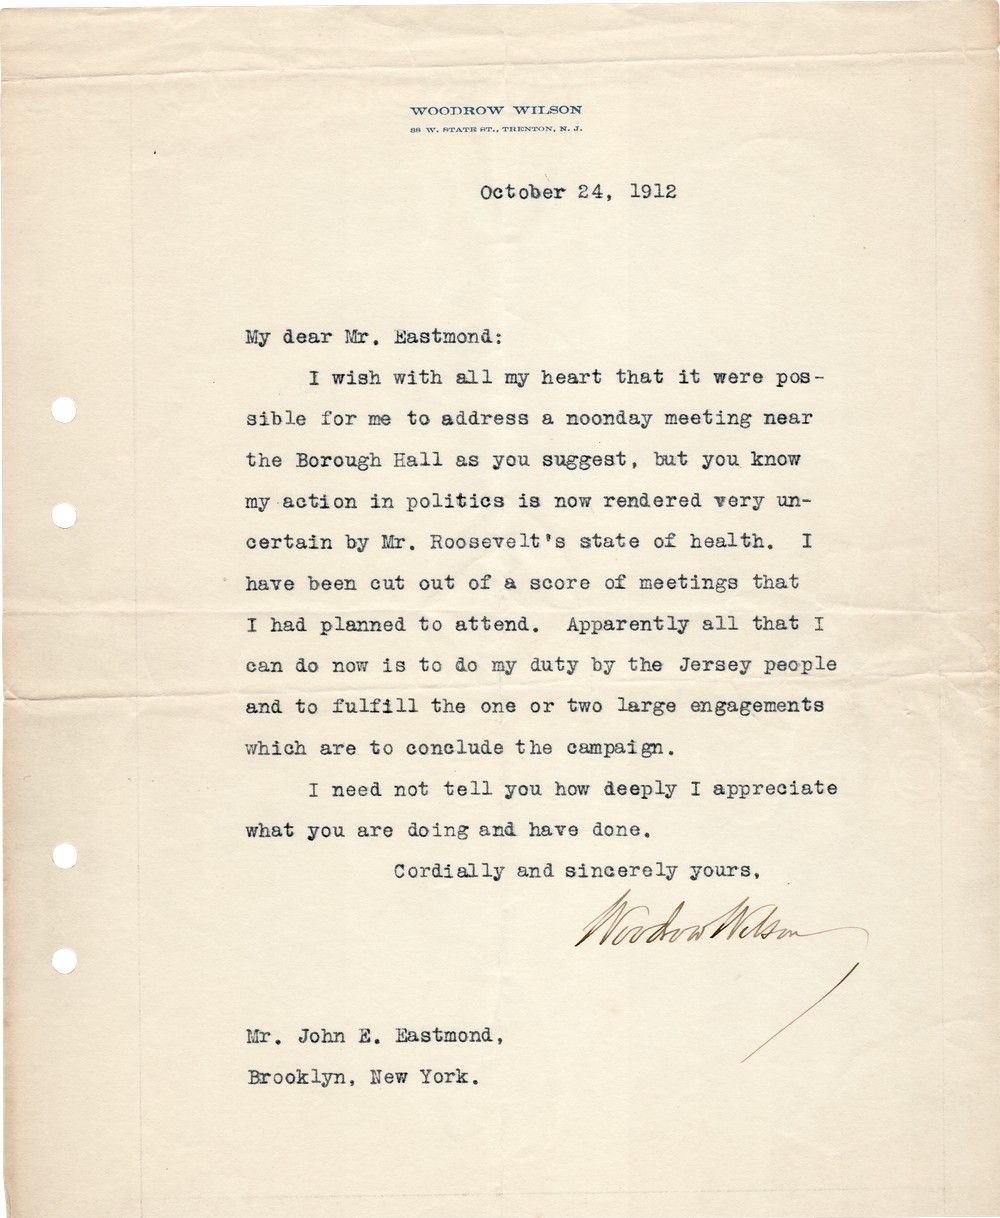 Woodrow Wilson Suspends His Campaign on Account of Theodore Roosevelt Assassination Attempt